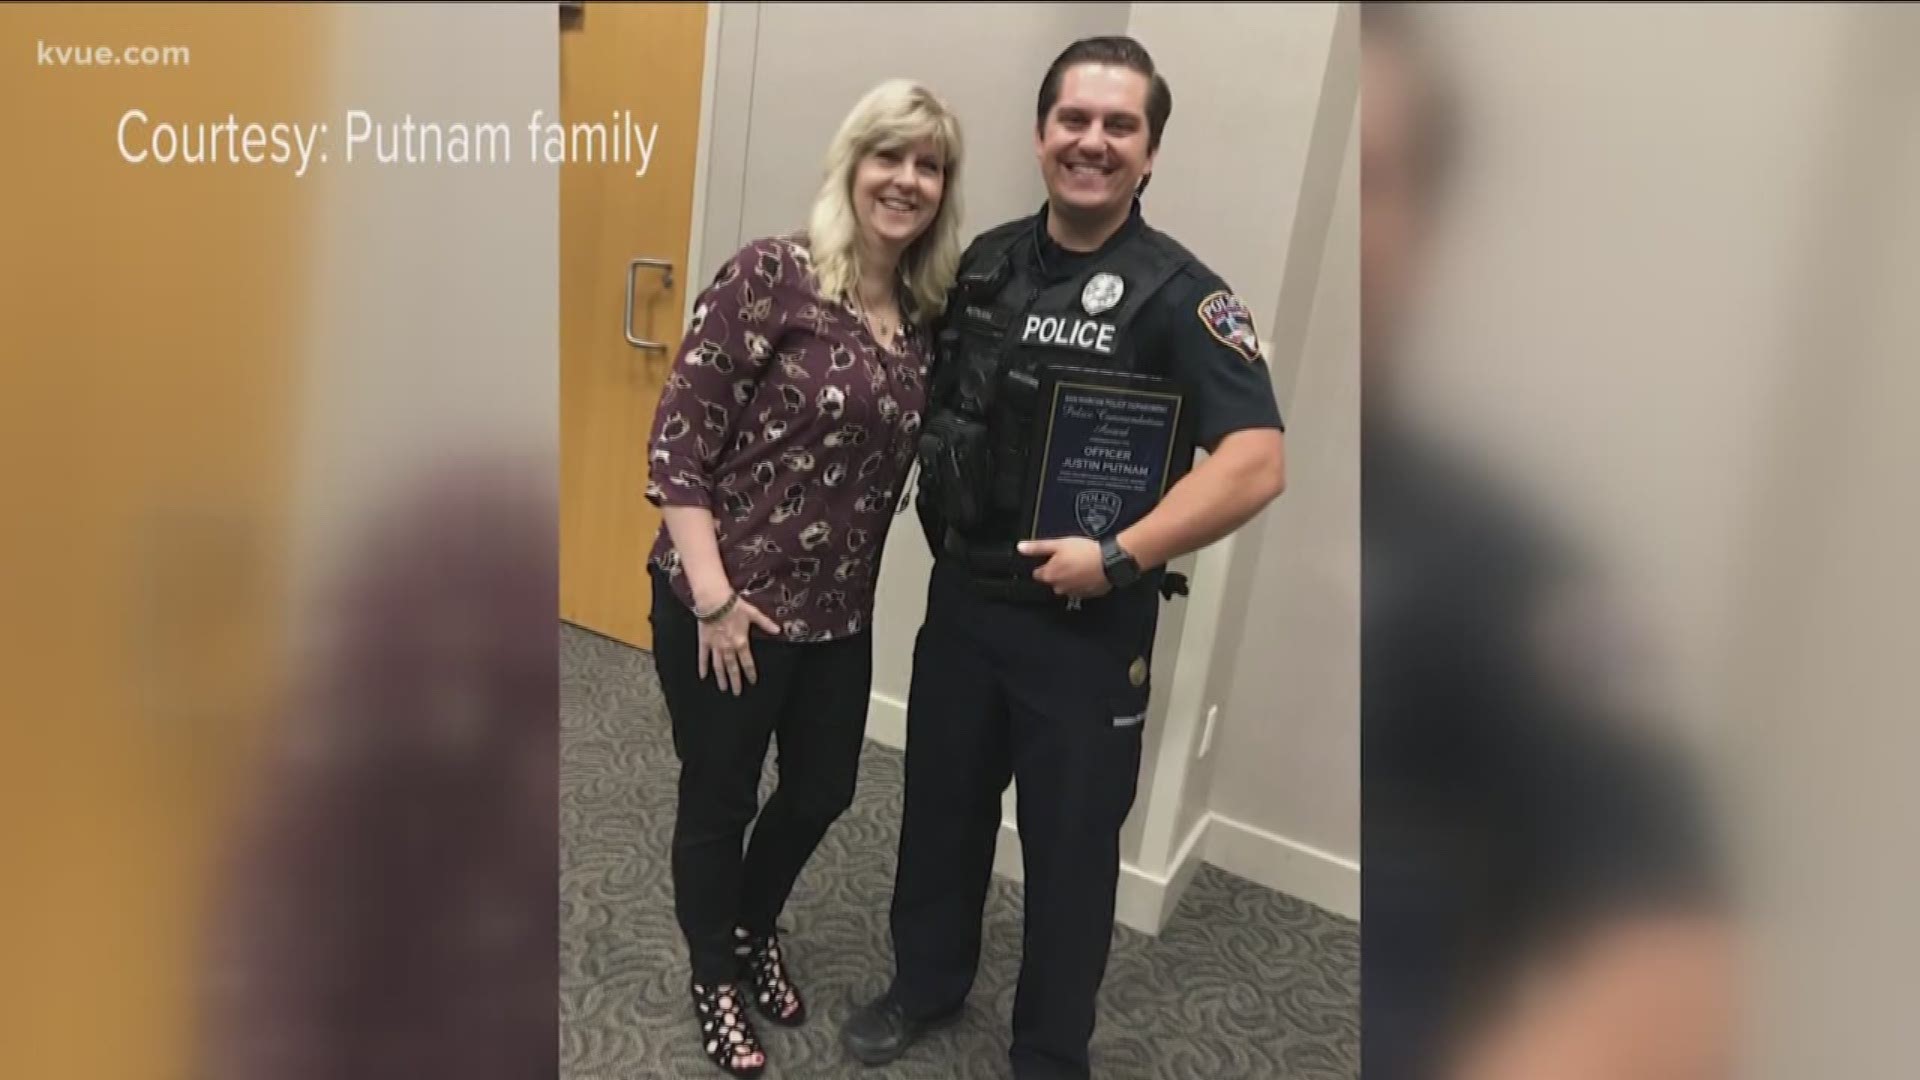 KVUE's Mike Marut spoke with the family of Justin Putnam, who was killed in the line of duty.